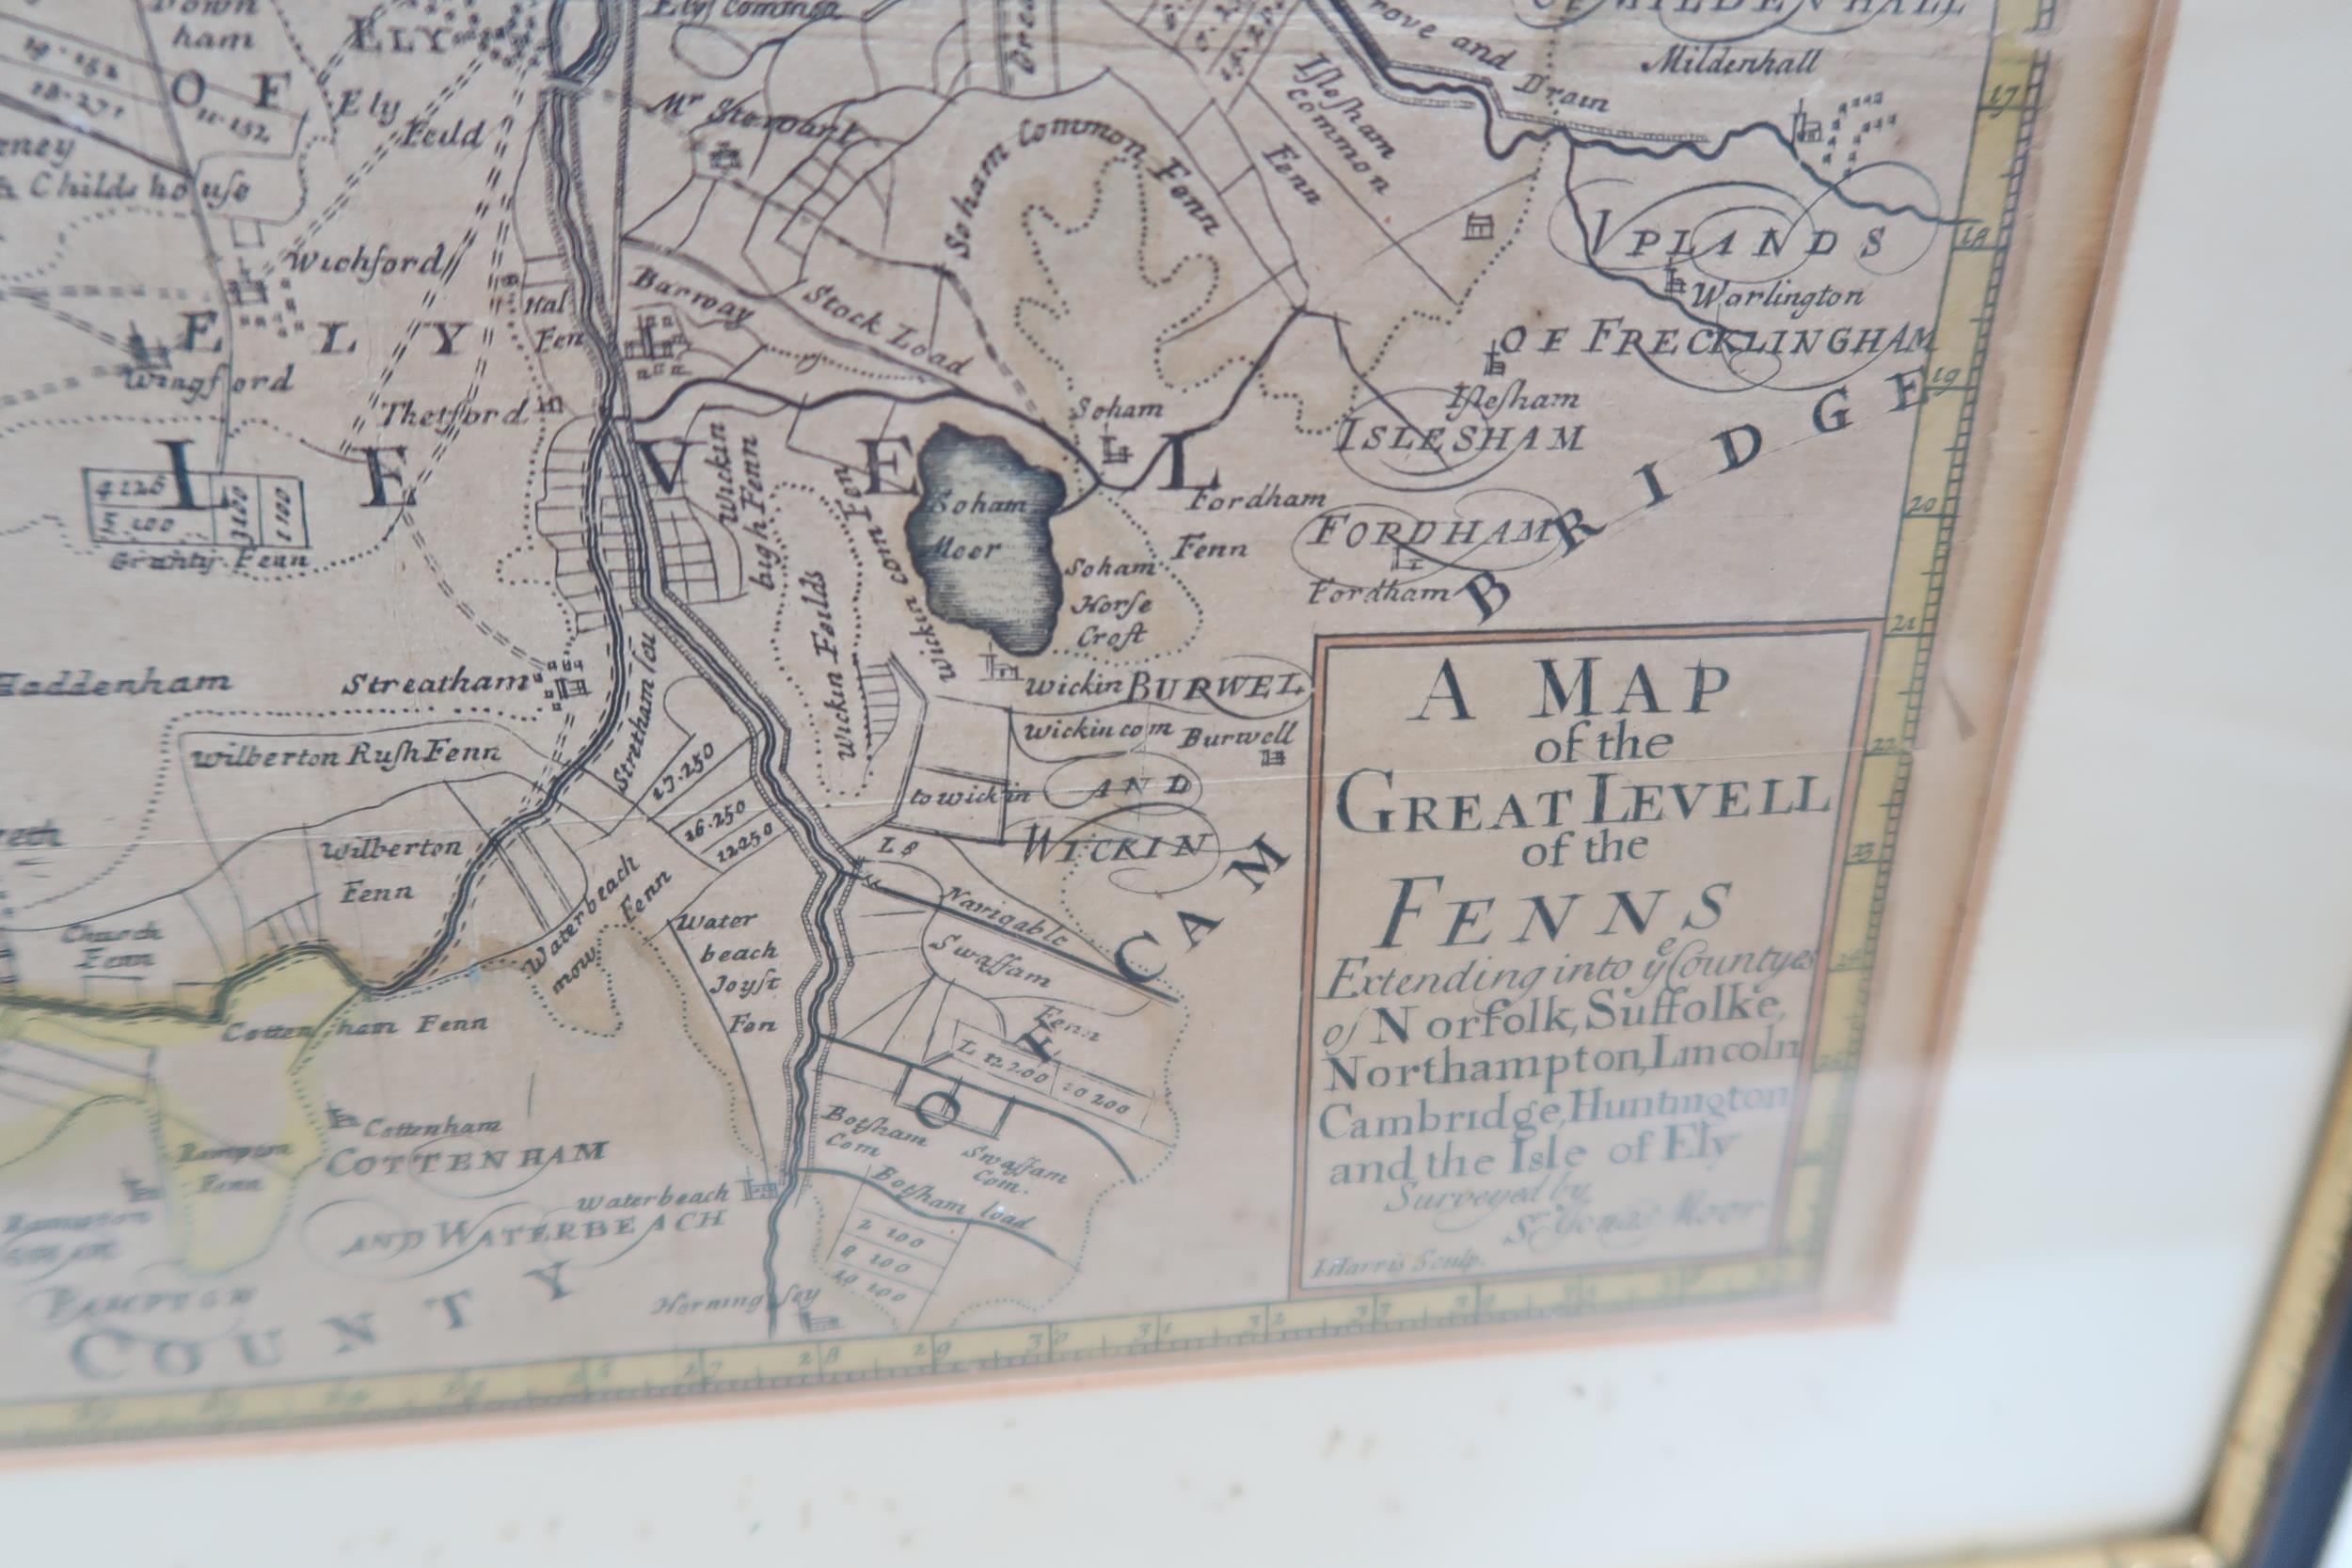 A map of Great Level of Fens by Harris after Jones Moor circa 1701 - 41cm x 30cm - Image 2 of 3